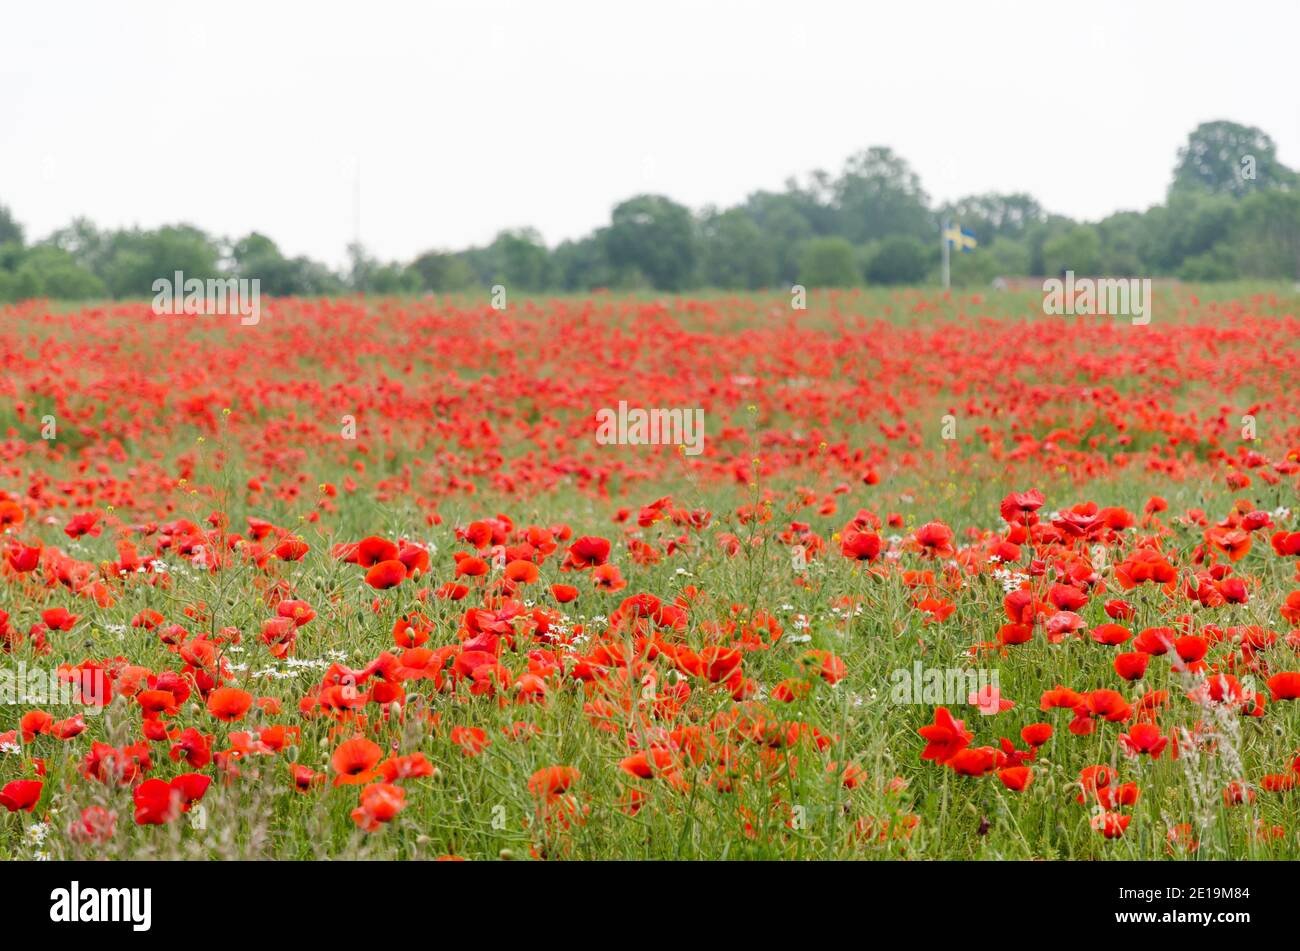 Red poppies all over in a farmers corn field Stock Photo